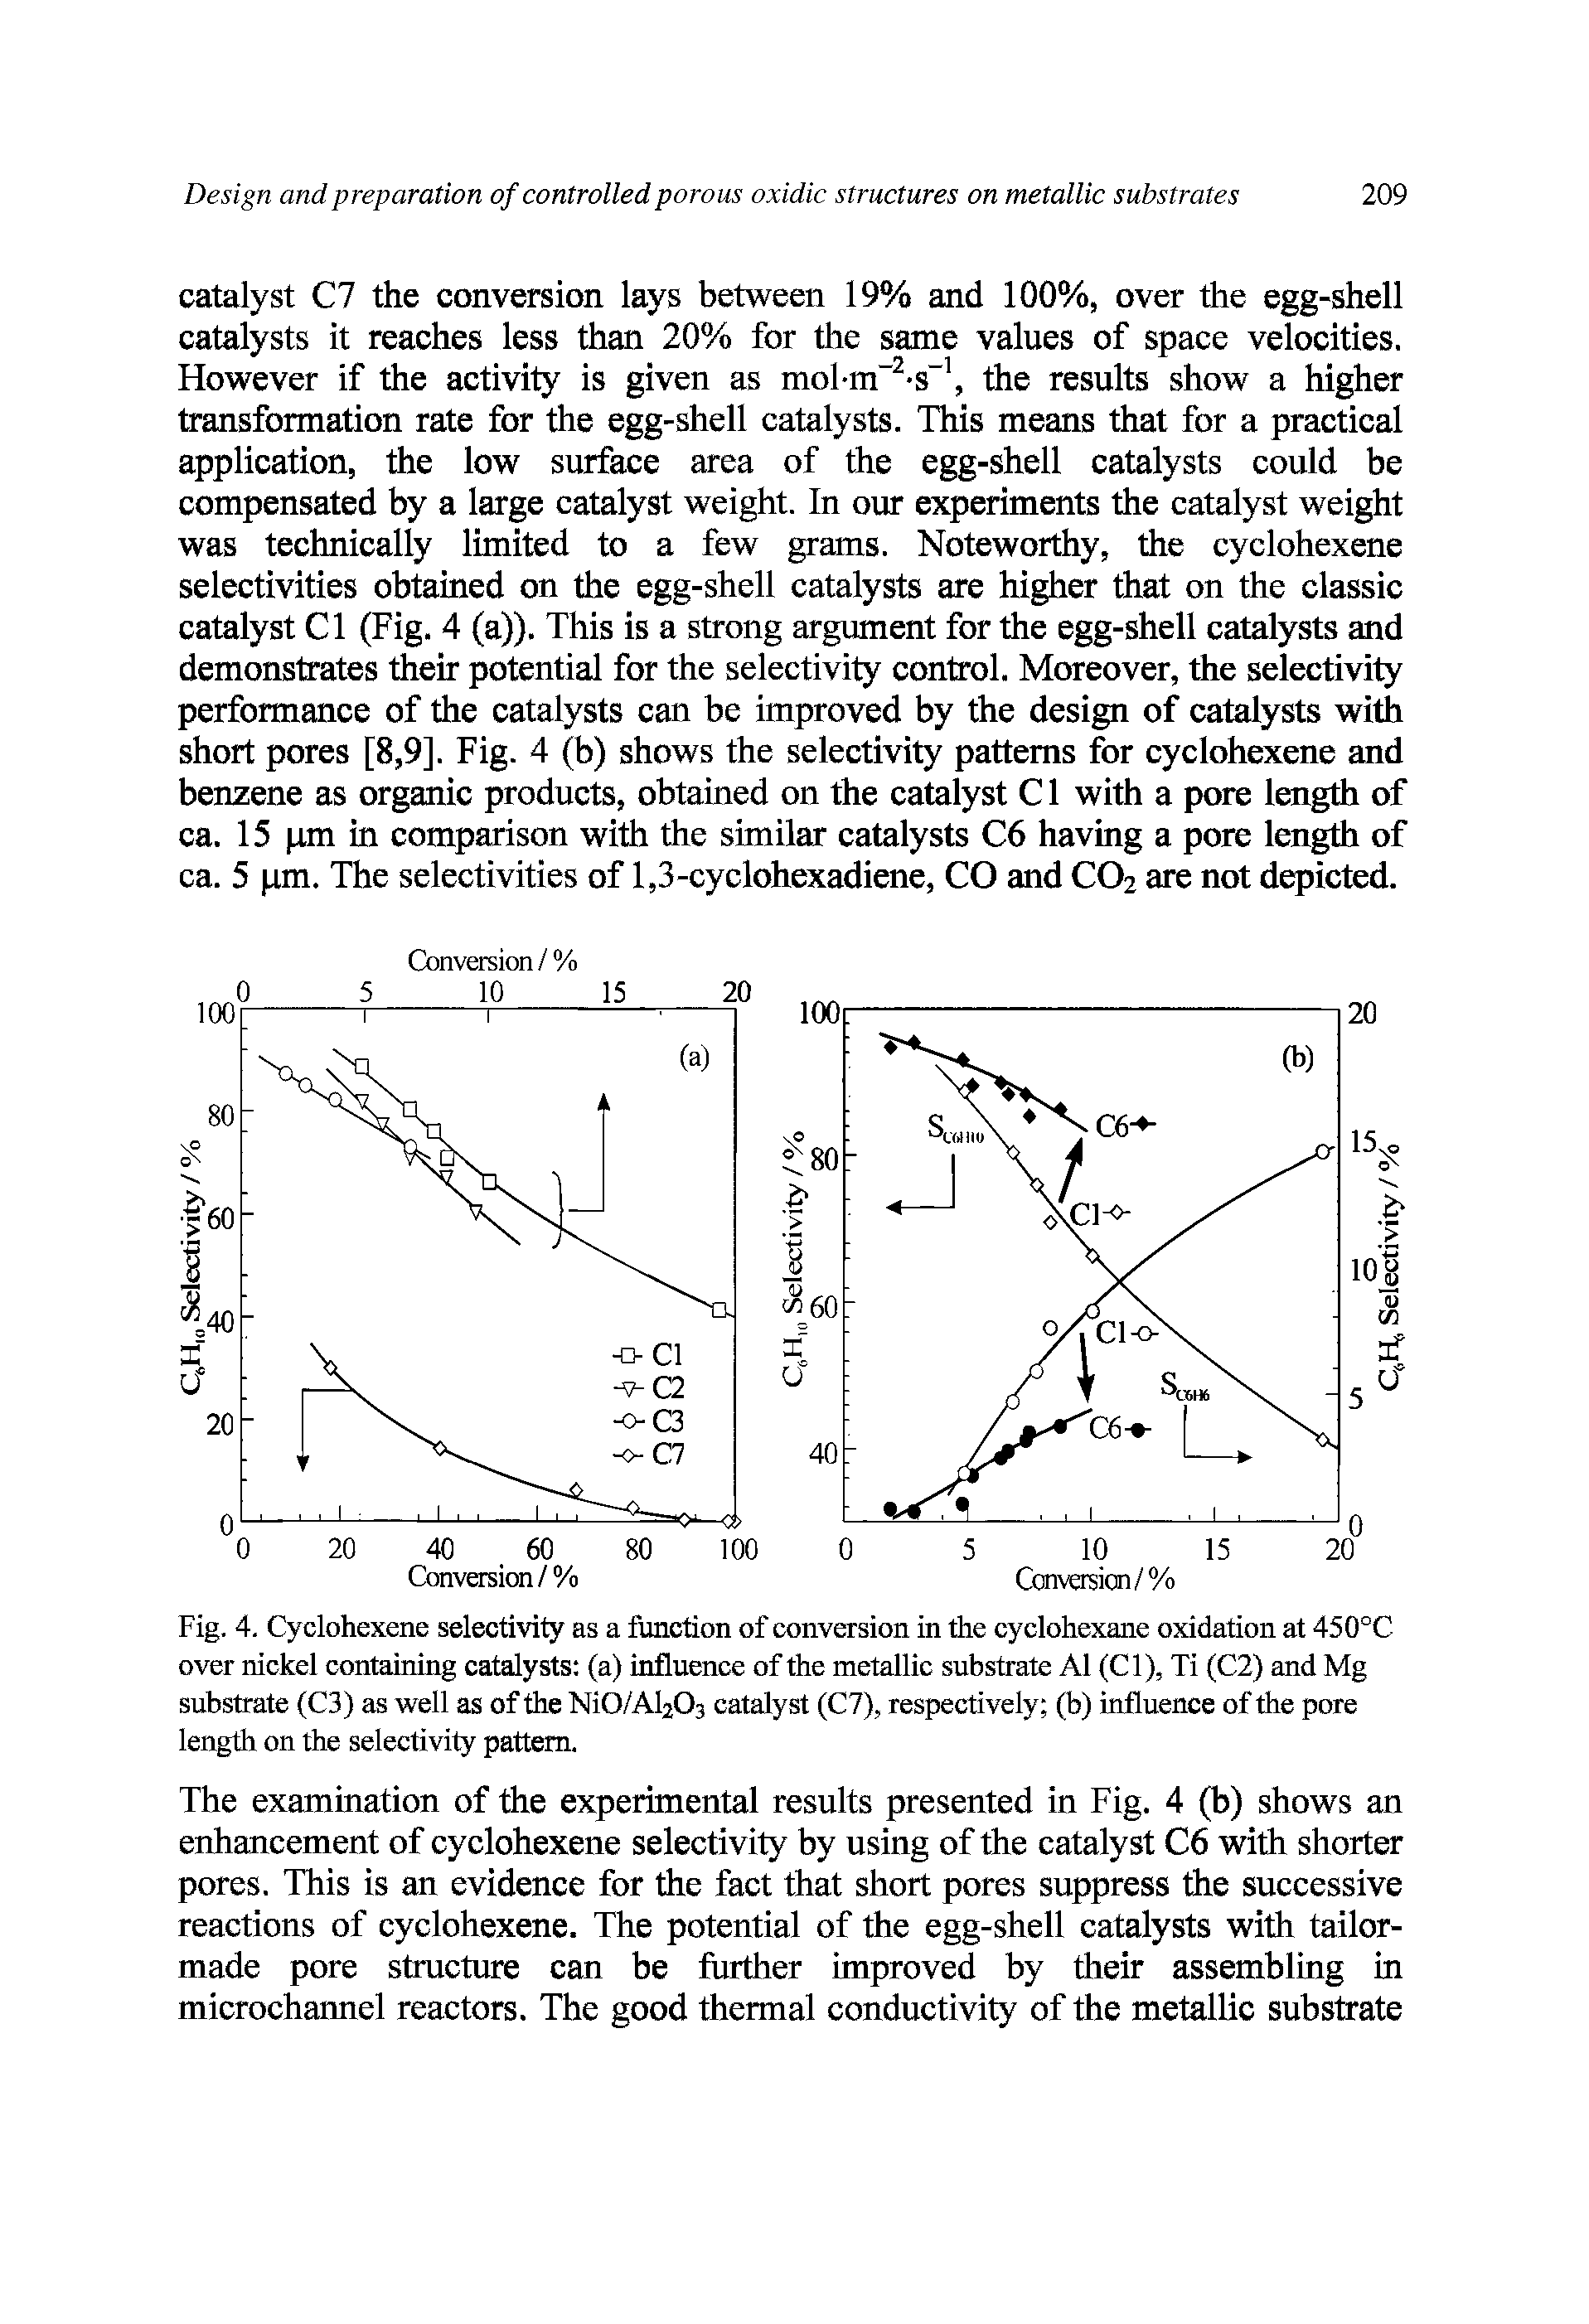 Fig. 4. Cyclohexene selectivity as a function of conversion in the cyclohexane oxidation at 450°C over nickel containing catalysts (a) influence of the metallic substrate A1 (Cl), Ti (C2) and Mg substrate (C3) as well as of the MO/AI2O3 catalyst (C7), respectively (b) influence of the pore length on the selectivity pattern.